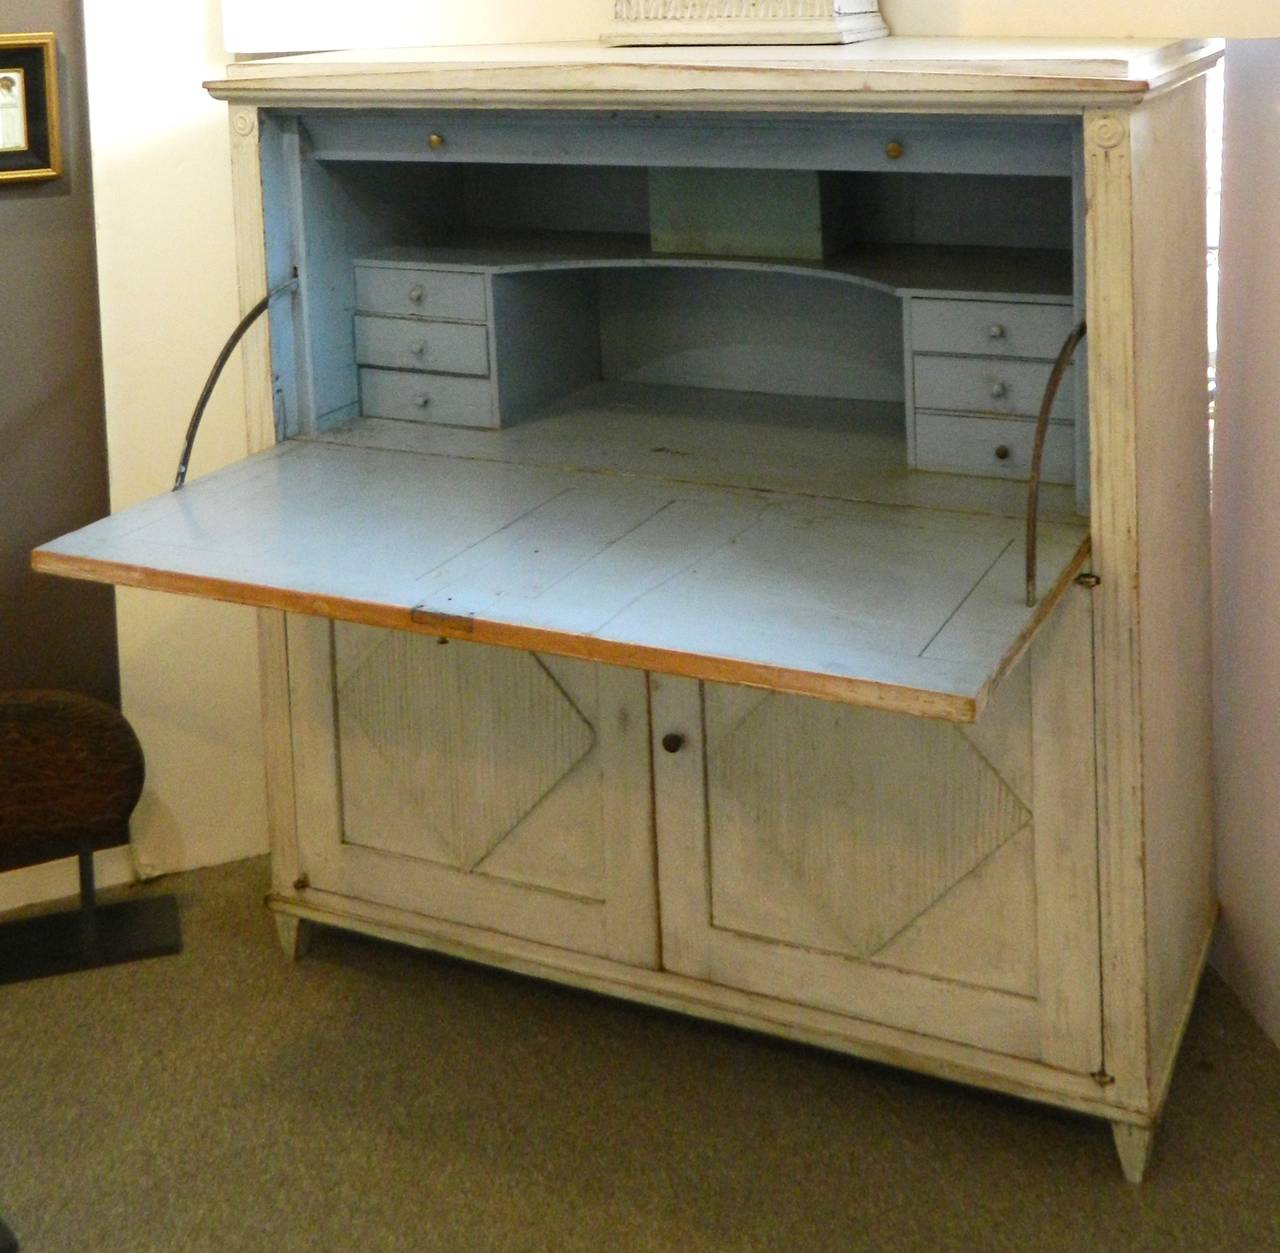 An early 19th century Swedish drop front desk and clock. It has an old painted surface with pale blue interior and a lower two-door cabinet with a single shelf. The clock is 50